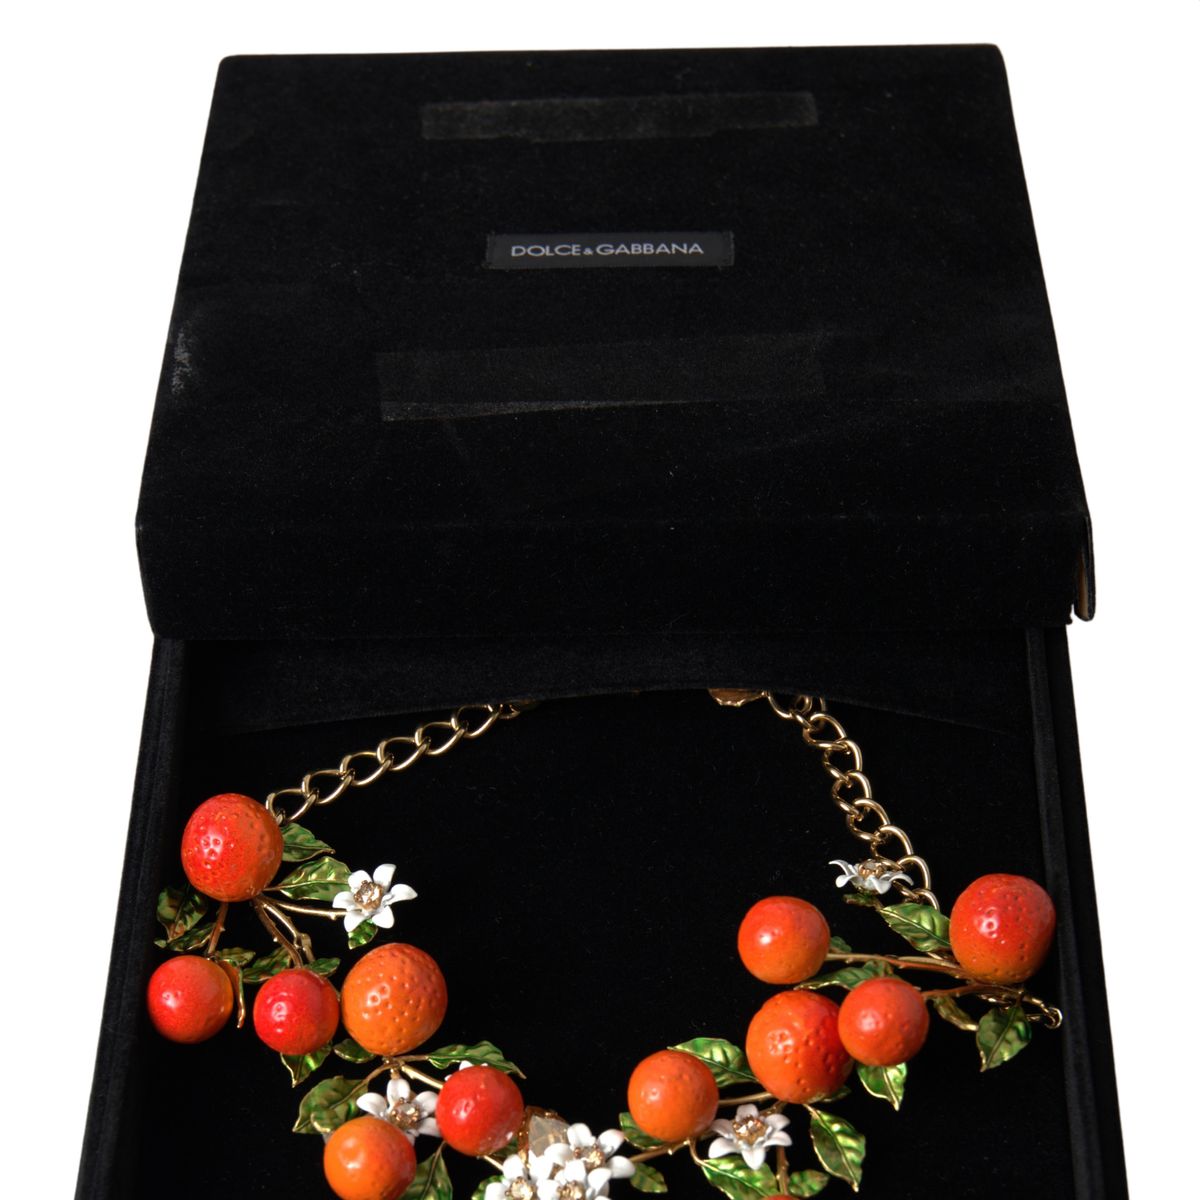 Multicolor Charm Necklace with Lobster Clasp